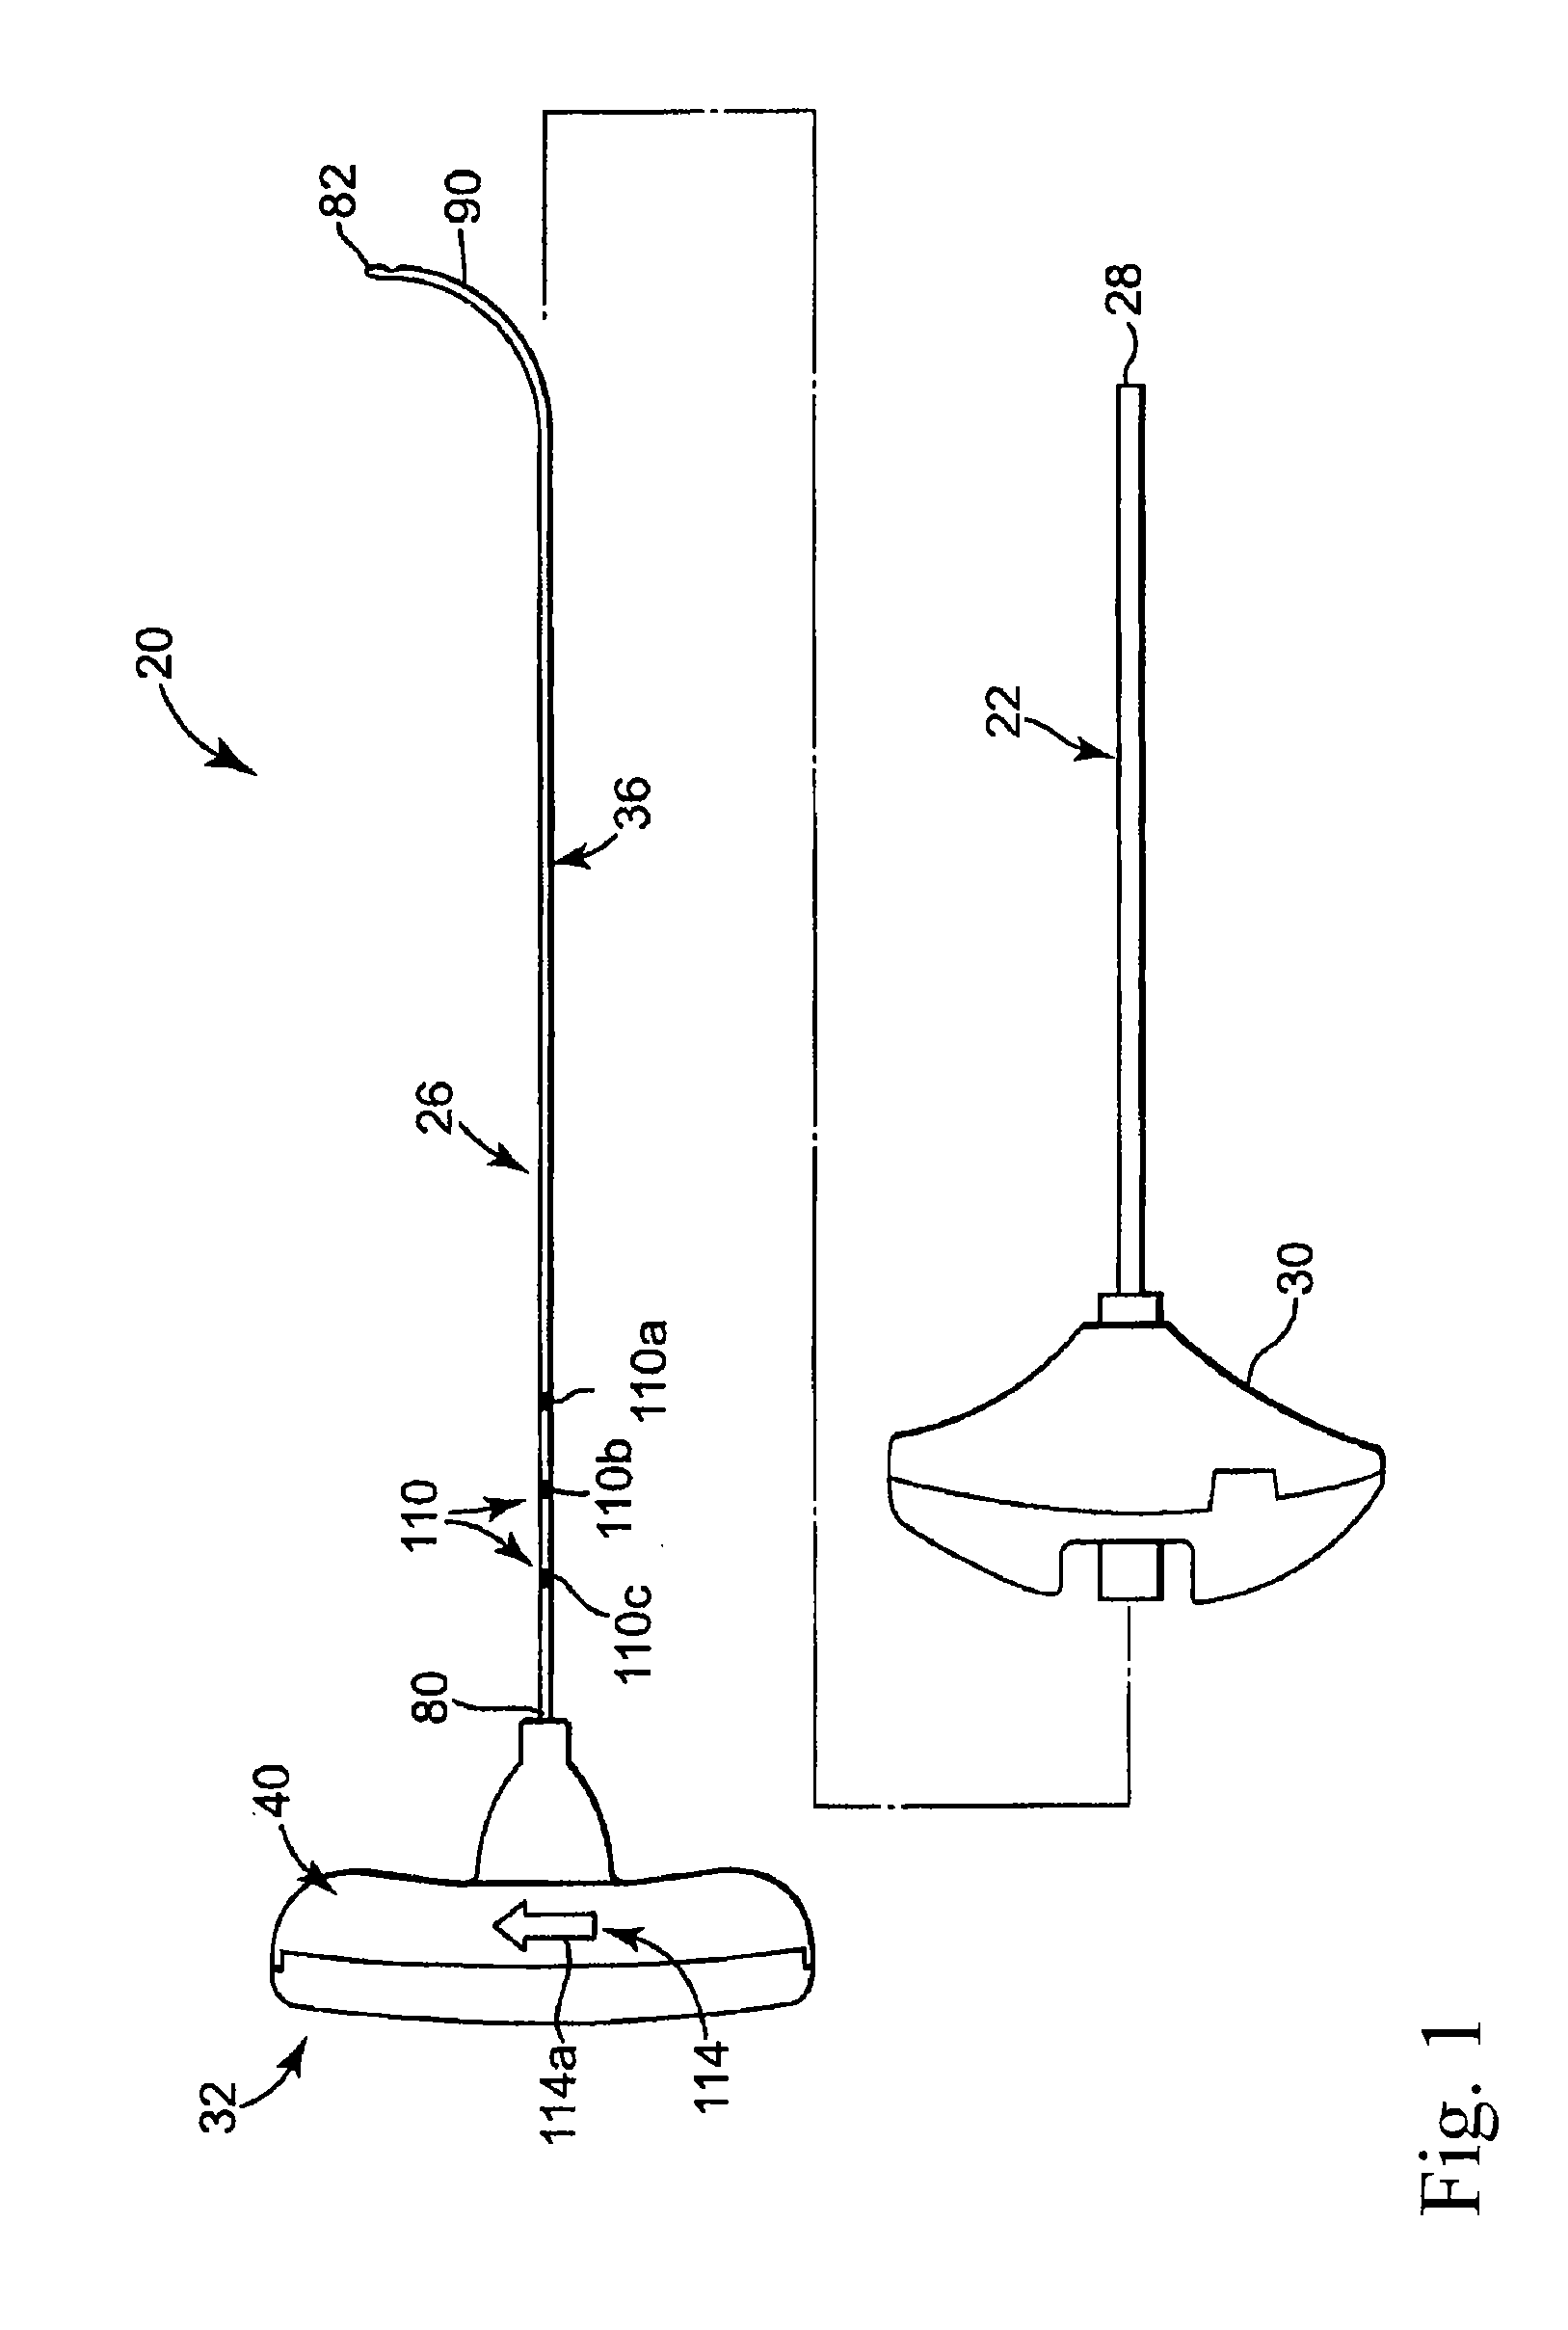 Device, system, and method for forming a cavity in and delivering a curable material into bone